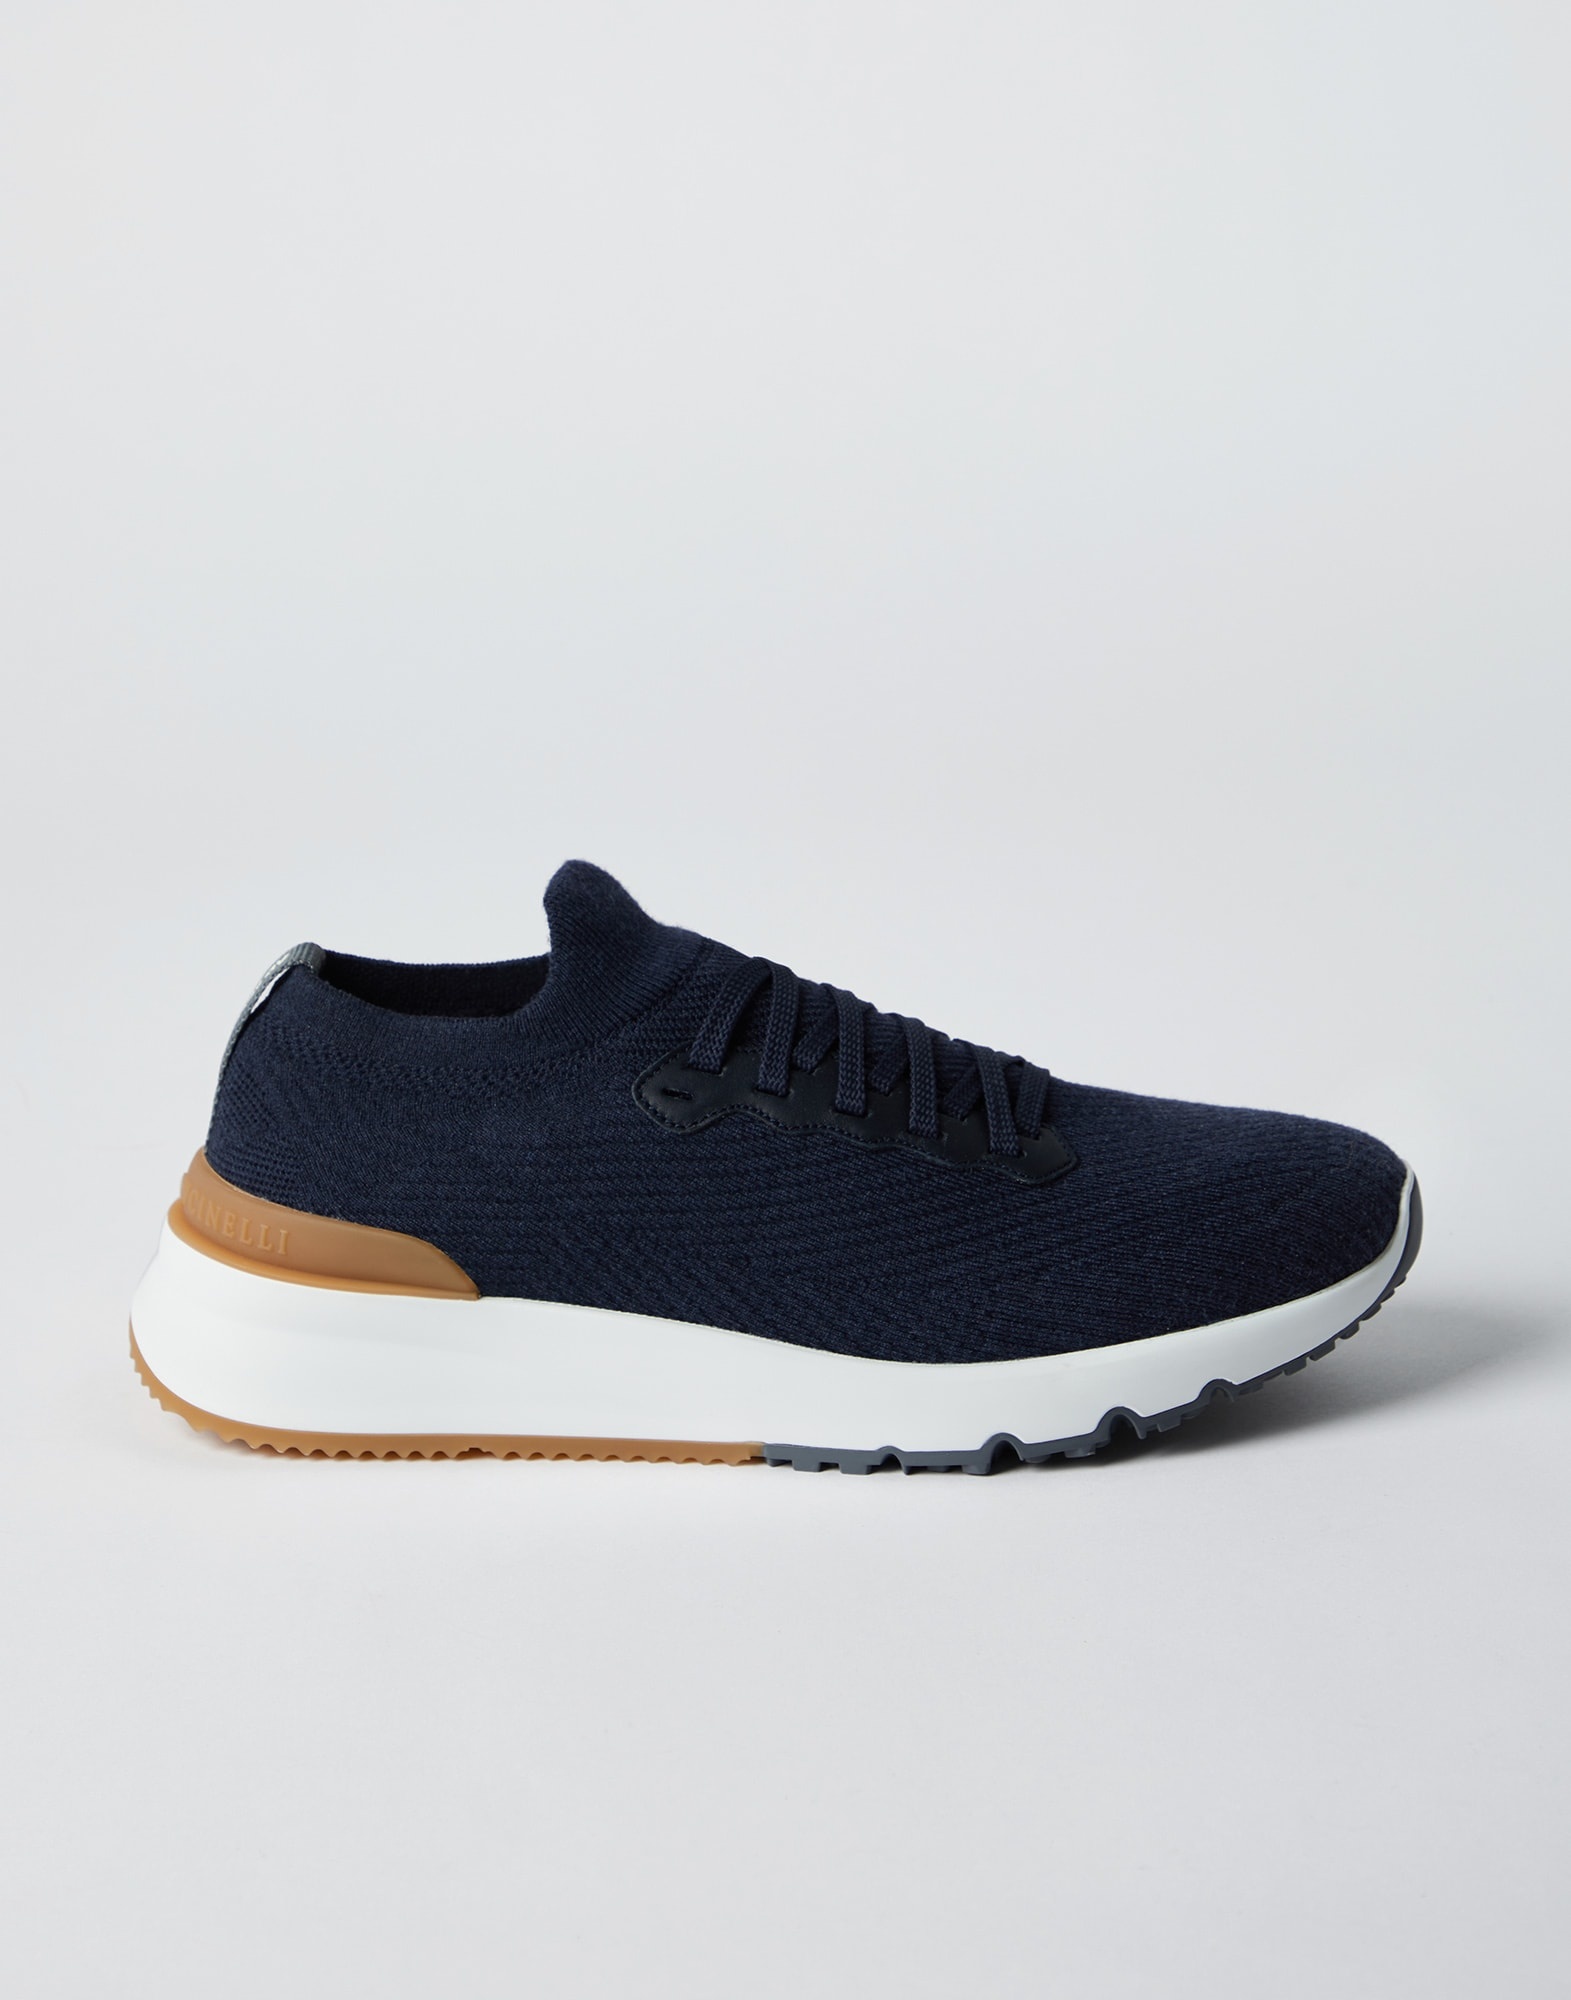 Wool knit and semi-polished calfskin runners with warm inner lining - 5